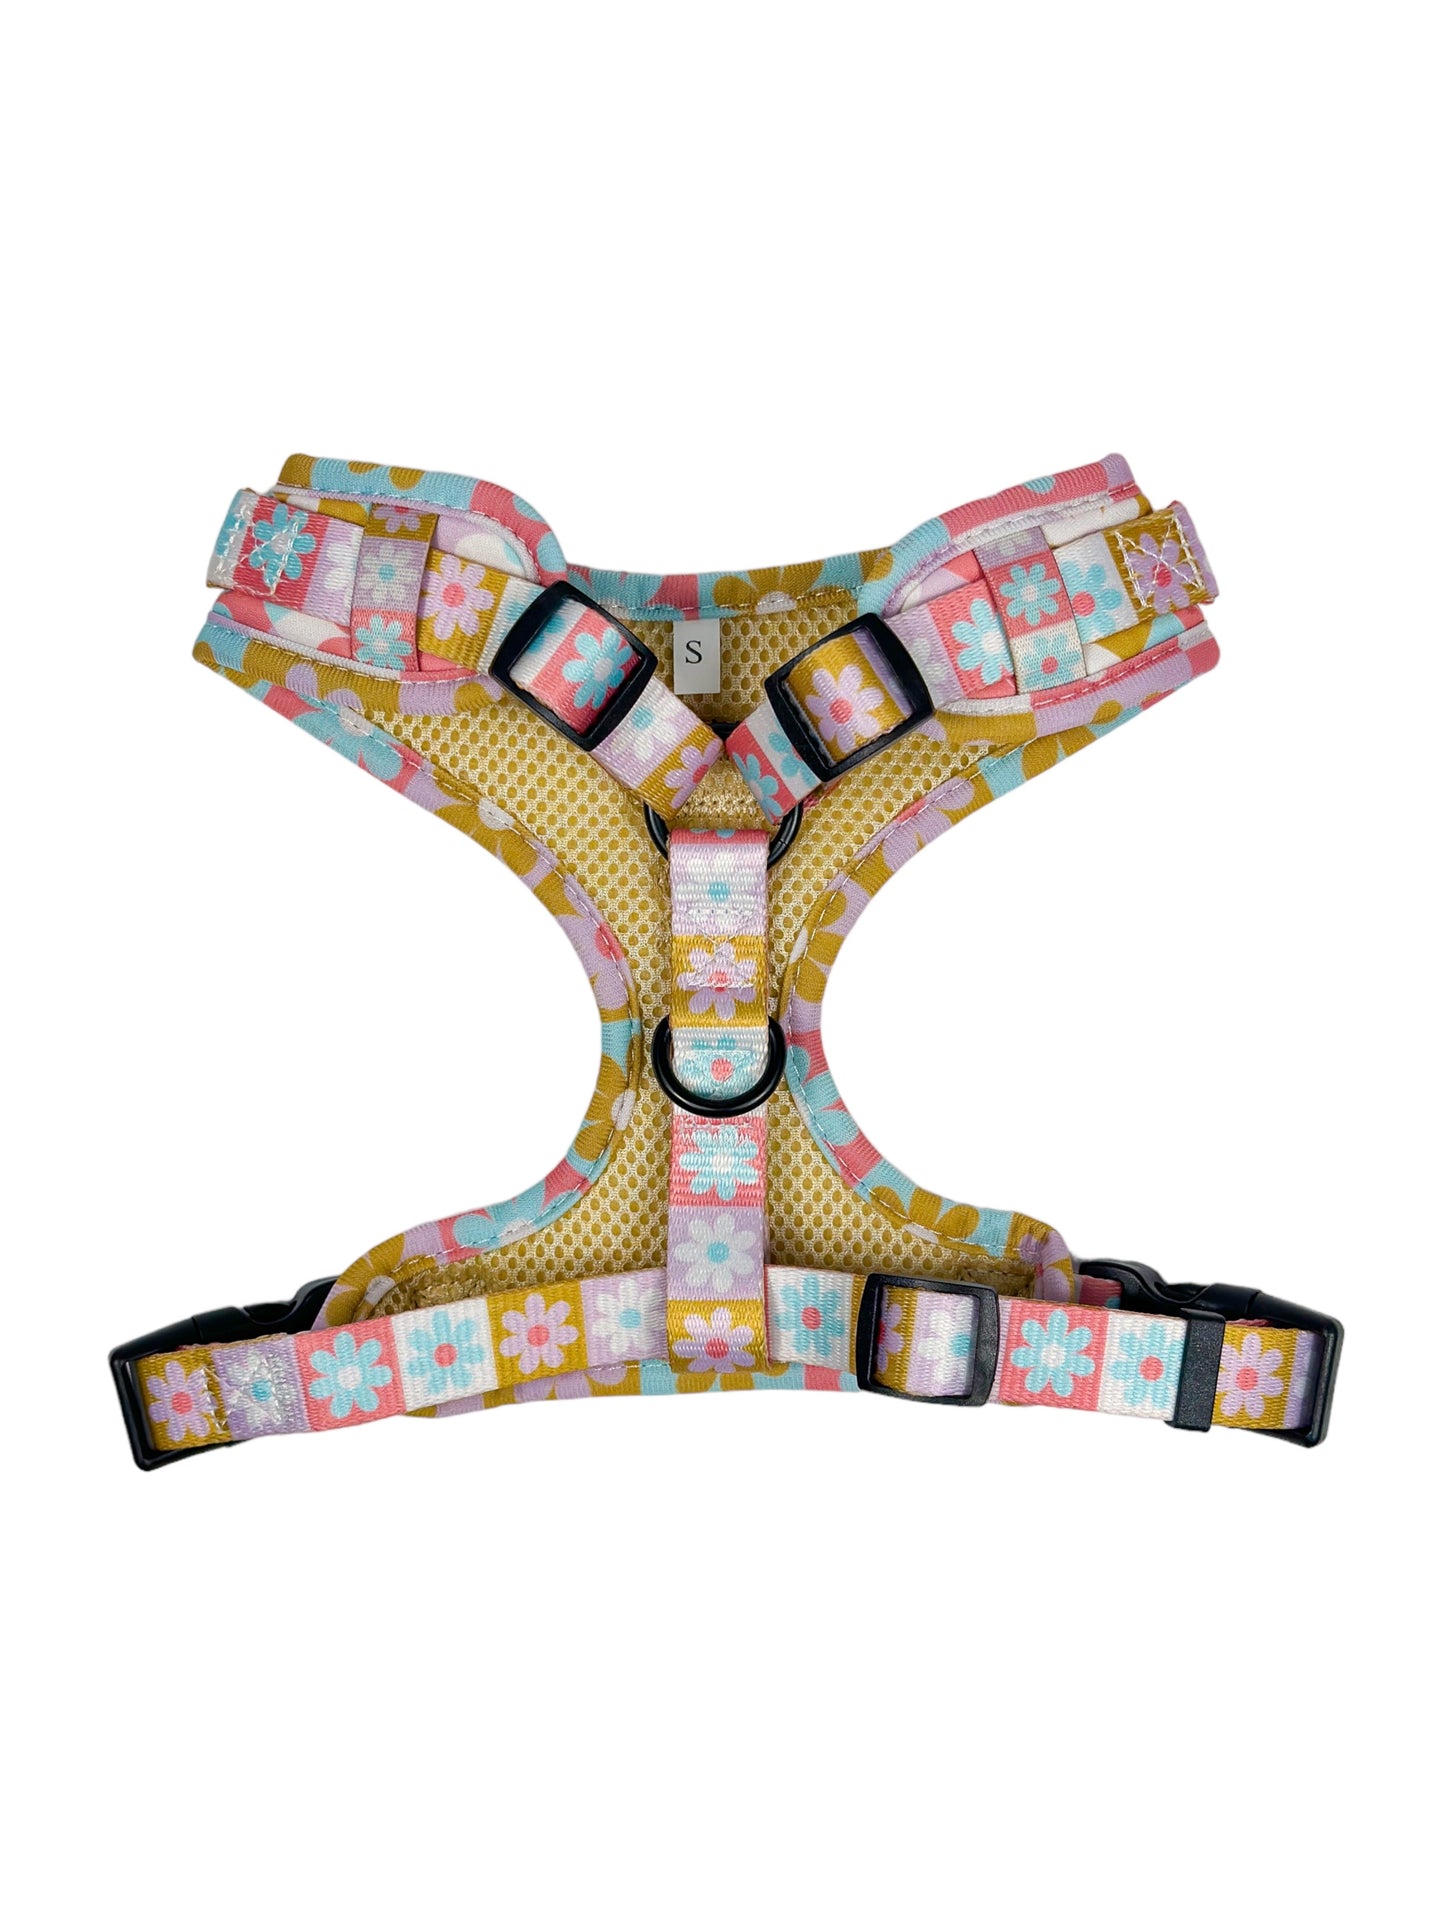 The Funky Flower Harness